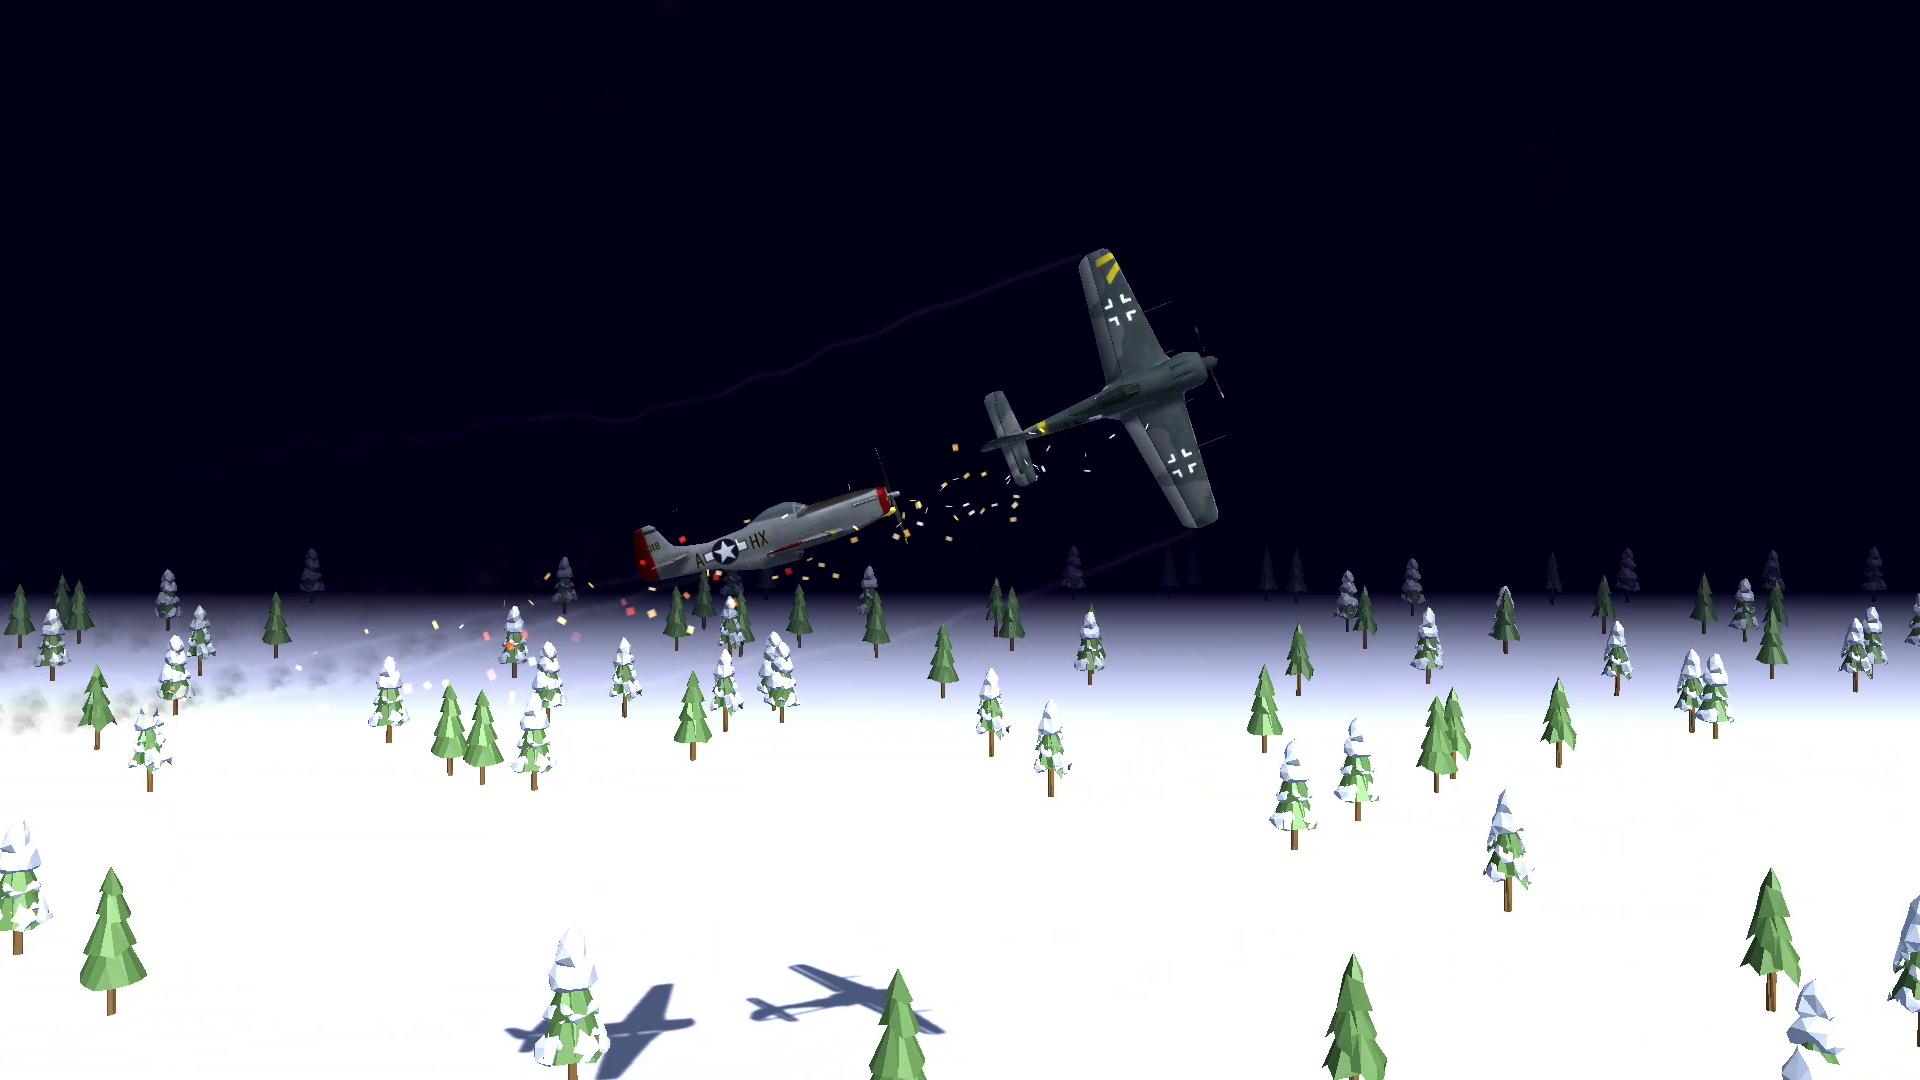 Night Fighter Ww2 Dogfight For Android Apk Download Images, Photos, Reviews